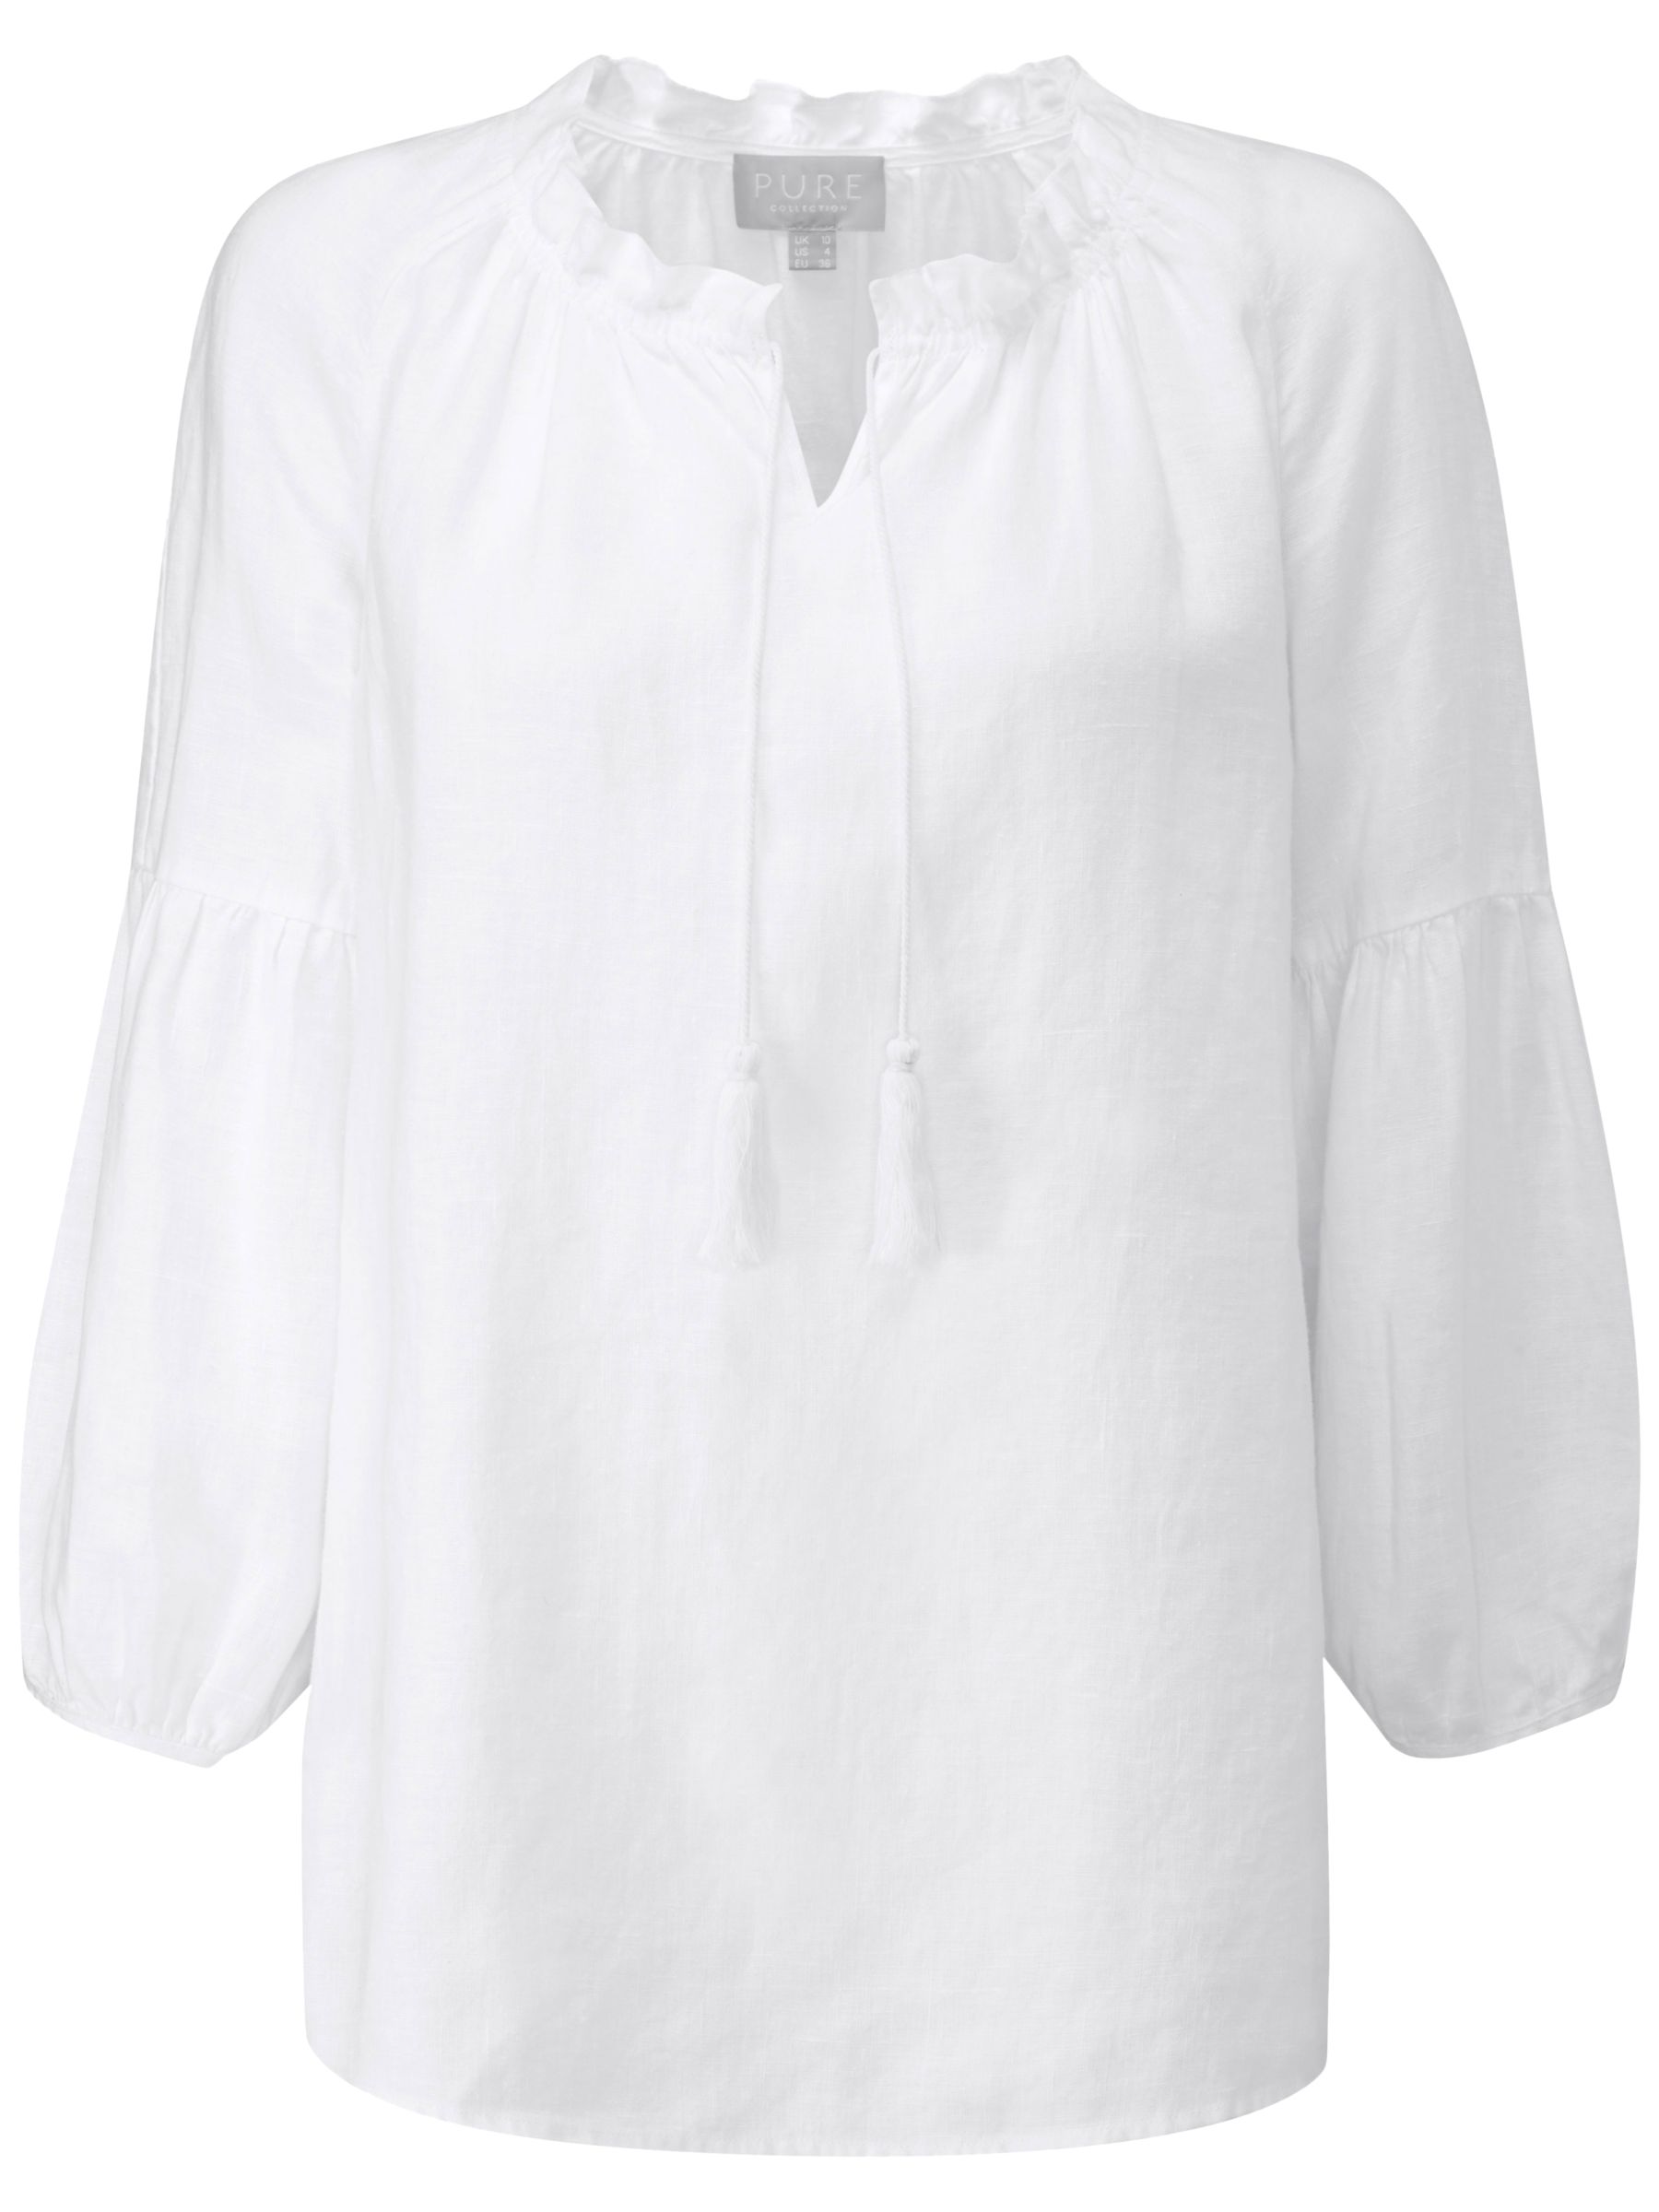 Pure Collection Laundered Linen Tassel Blouse